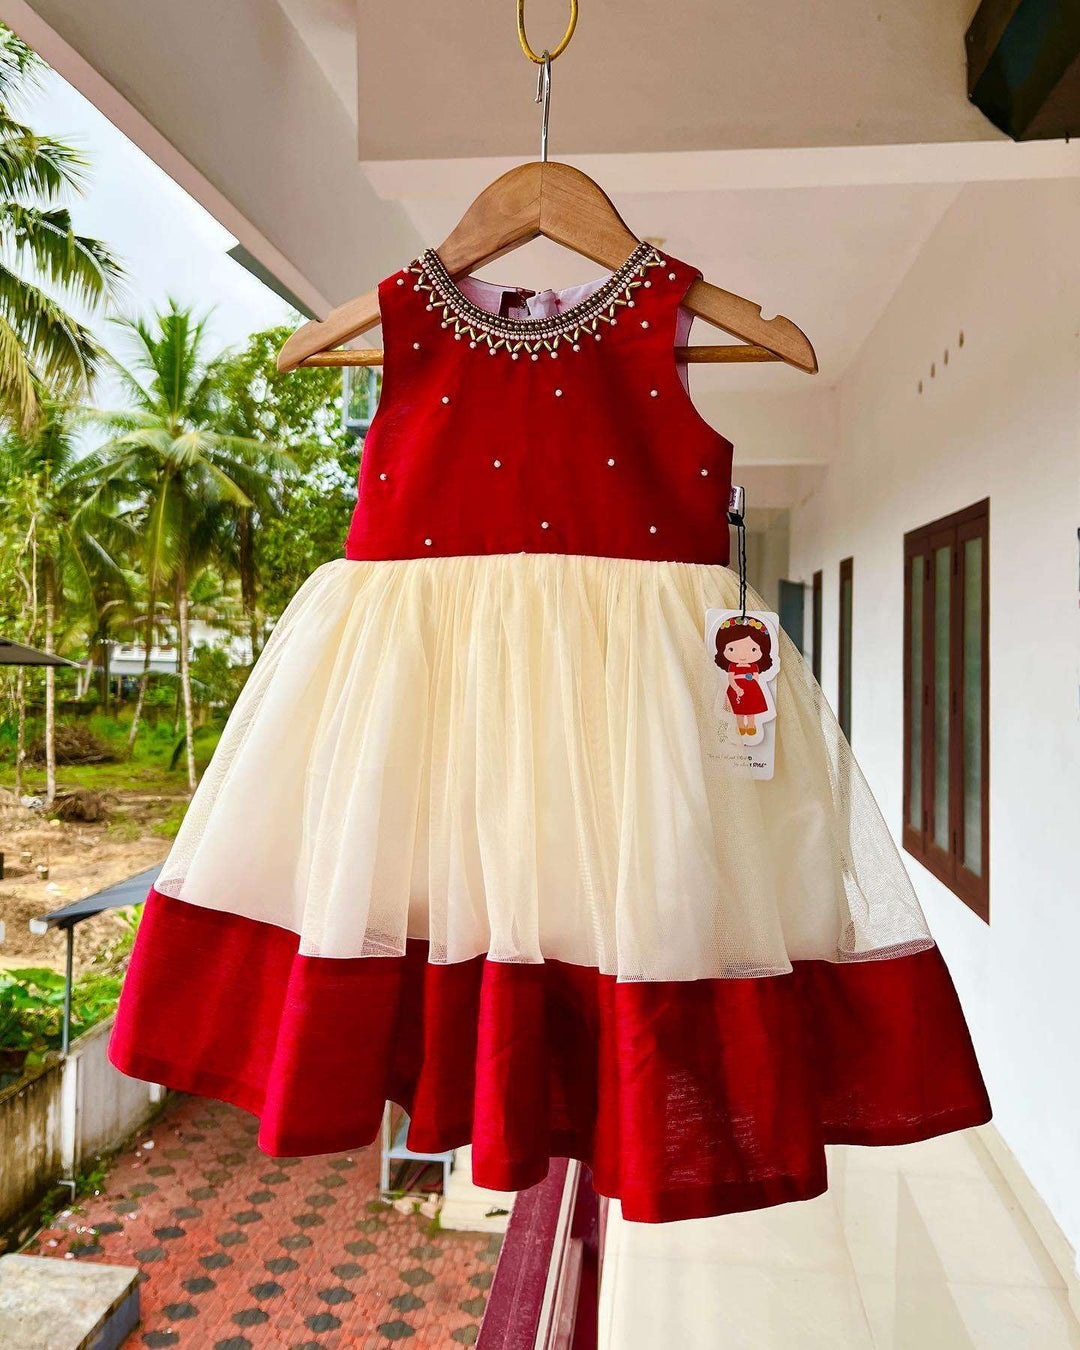 Cream & Meroon Traditional Handwork Kerala Frock
Material:  Creamish golden soft quality net with premium cream ultra satin inside for shining, Meroon silk material with hand embroidery beads on the neck and body 